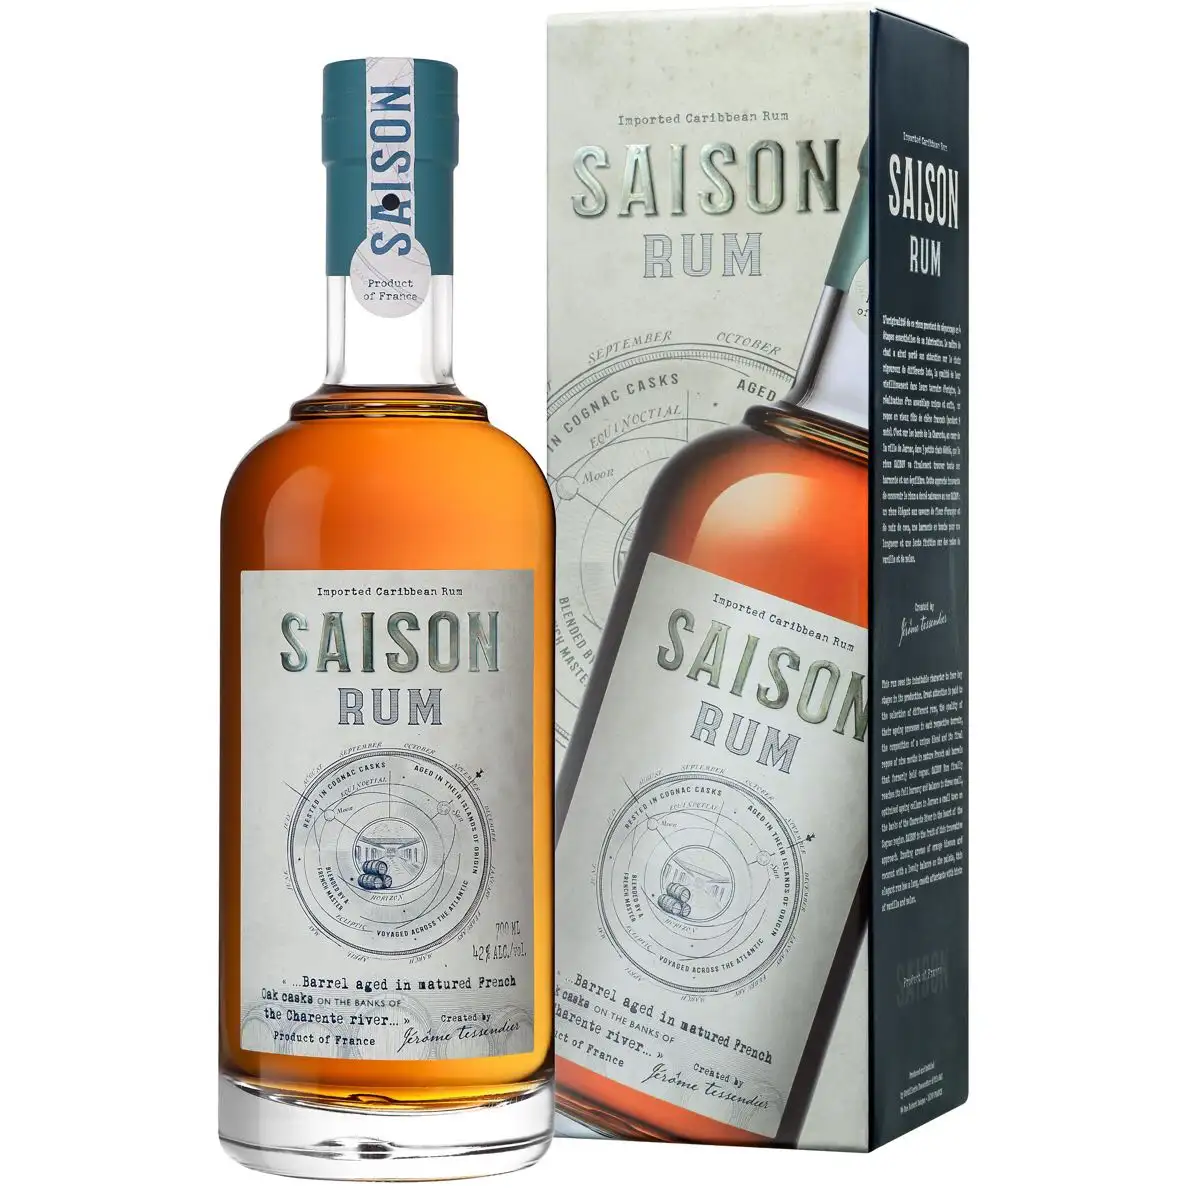 Image of the front of the bottle of the rum Saison Rum